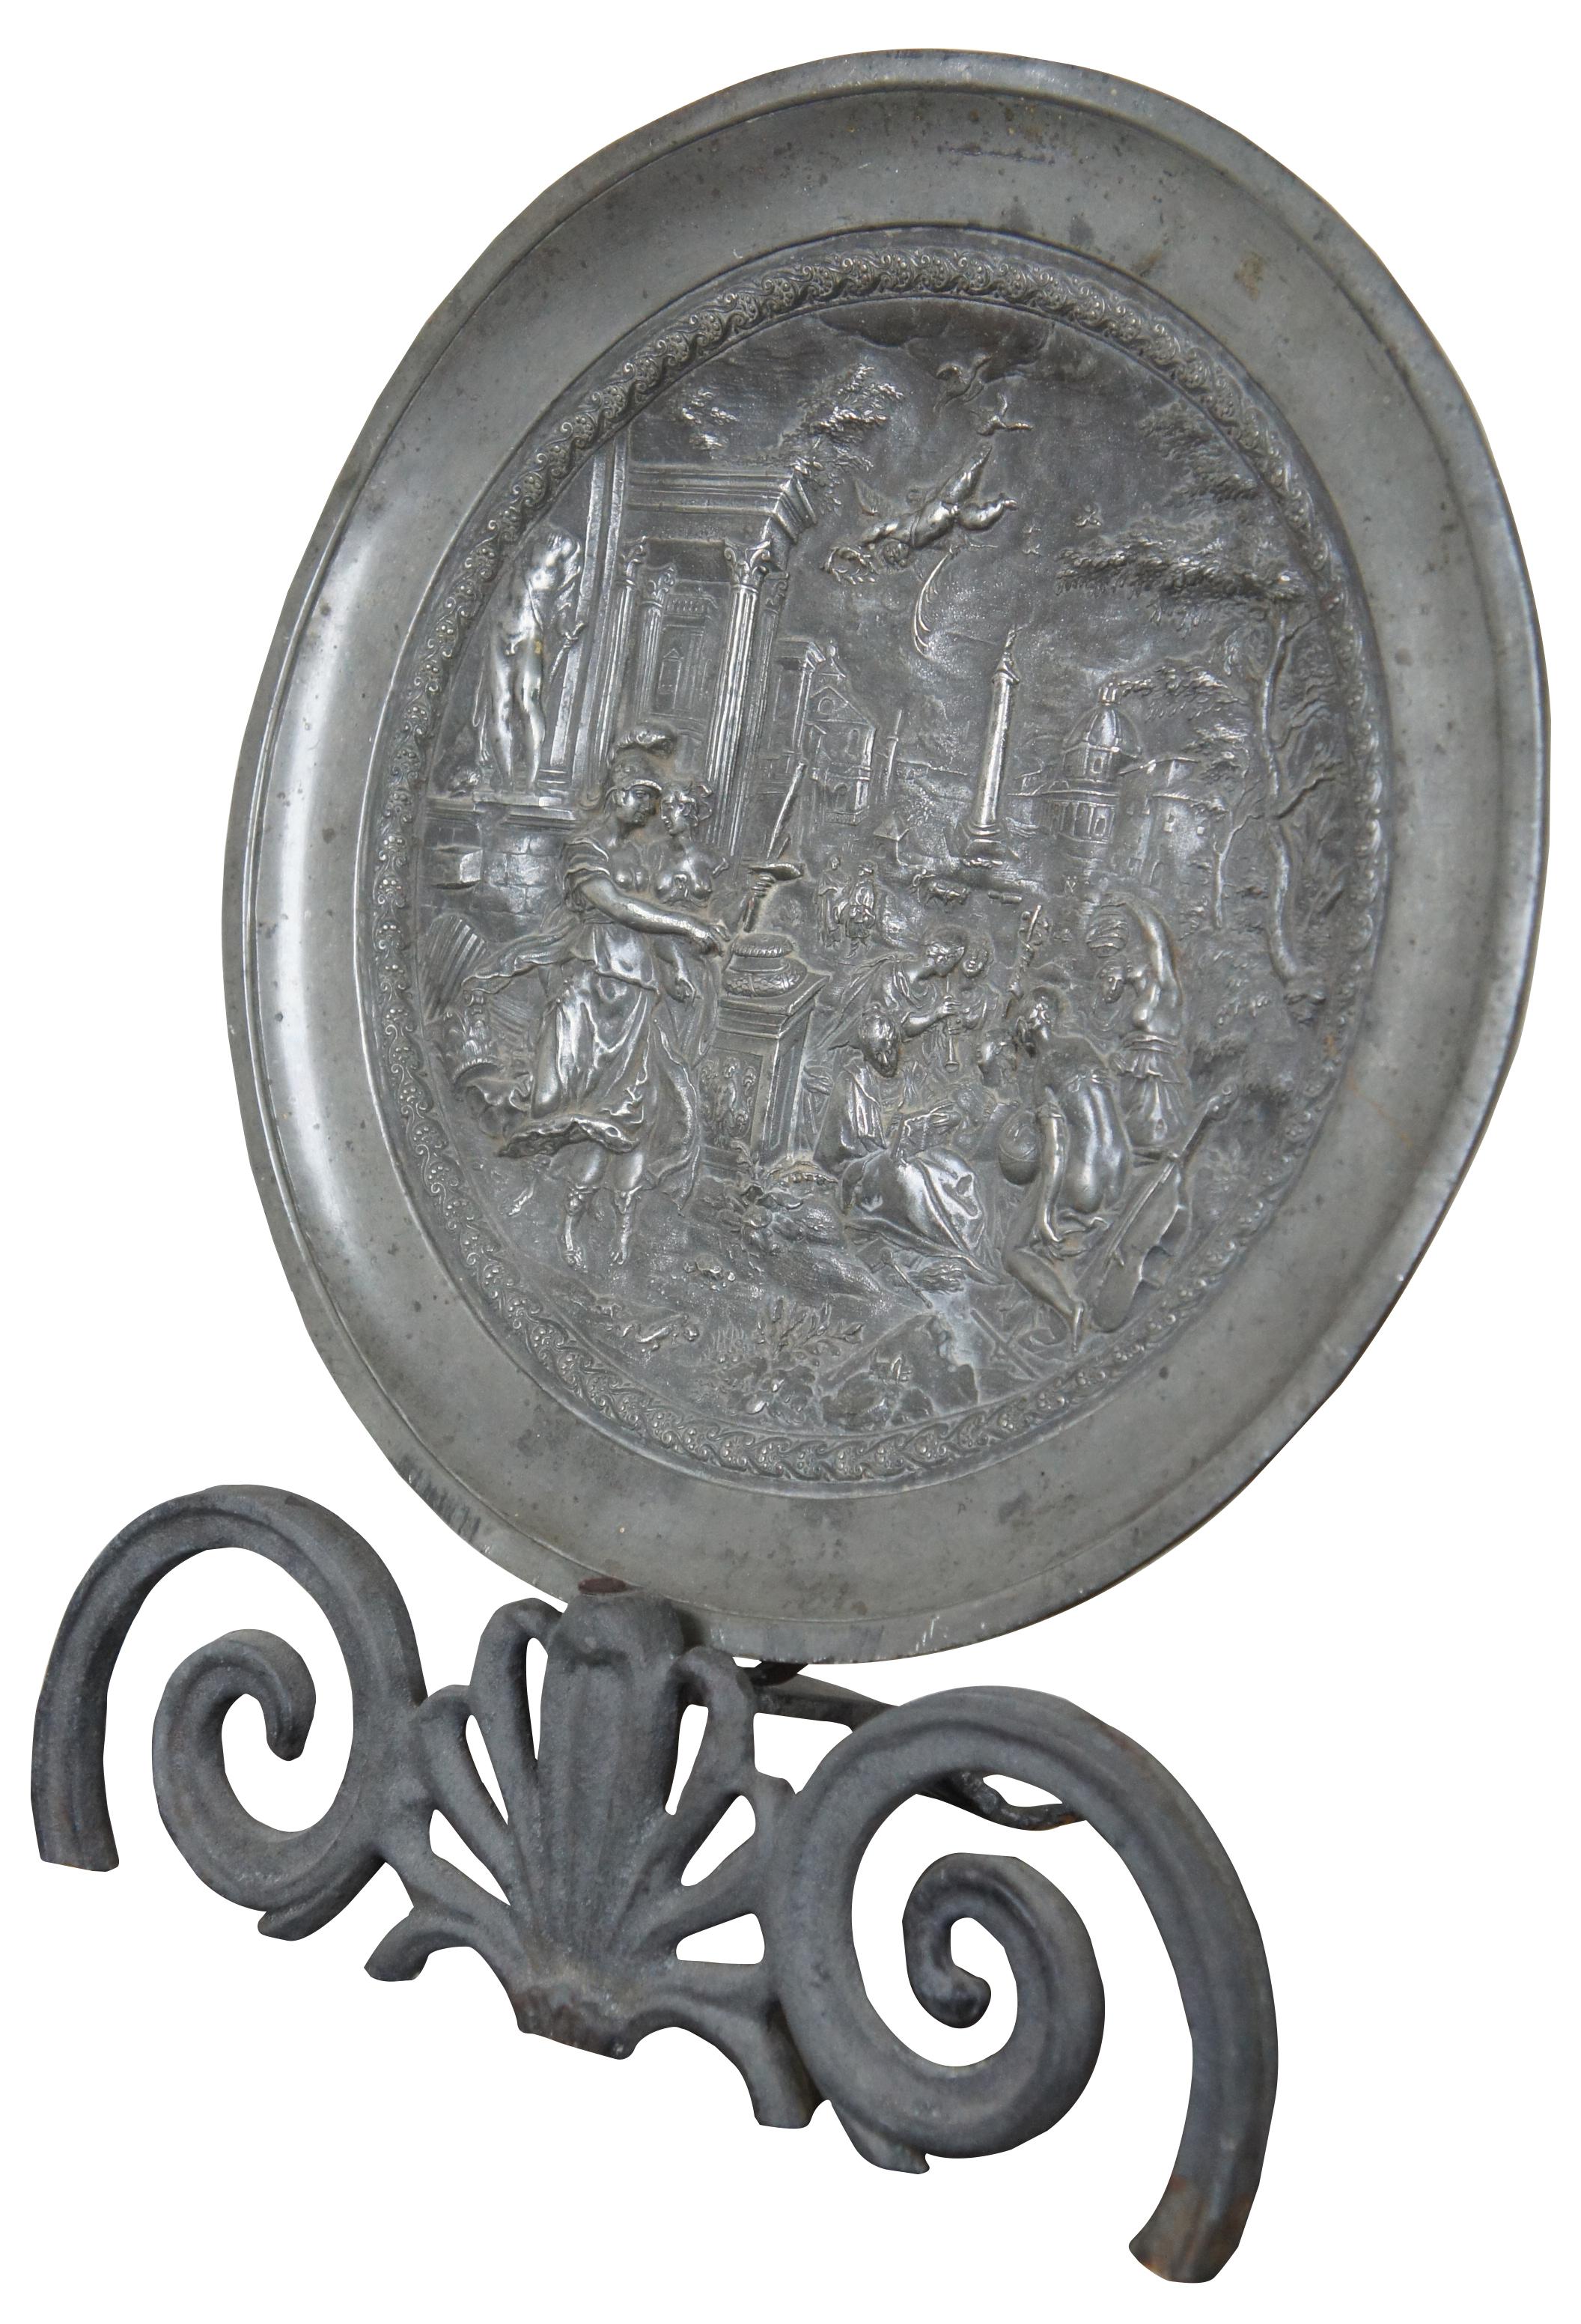 Pewter plate by Arthur Chaumette (Paris, France), circa 1890s. Featuring a detailed Renaissance scene of a Roman forum with Cupid flying above Athena and other figures. Stamped on reverse with a crowned rose with the initials “ND” and another worn